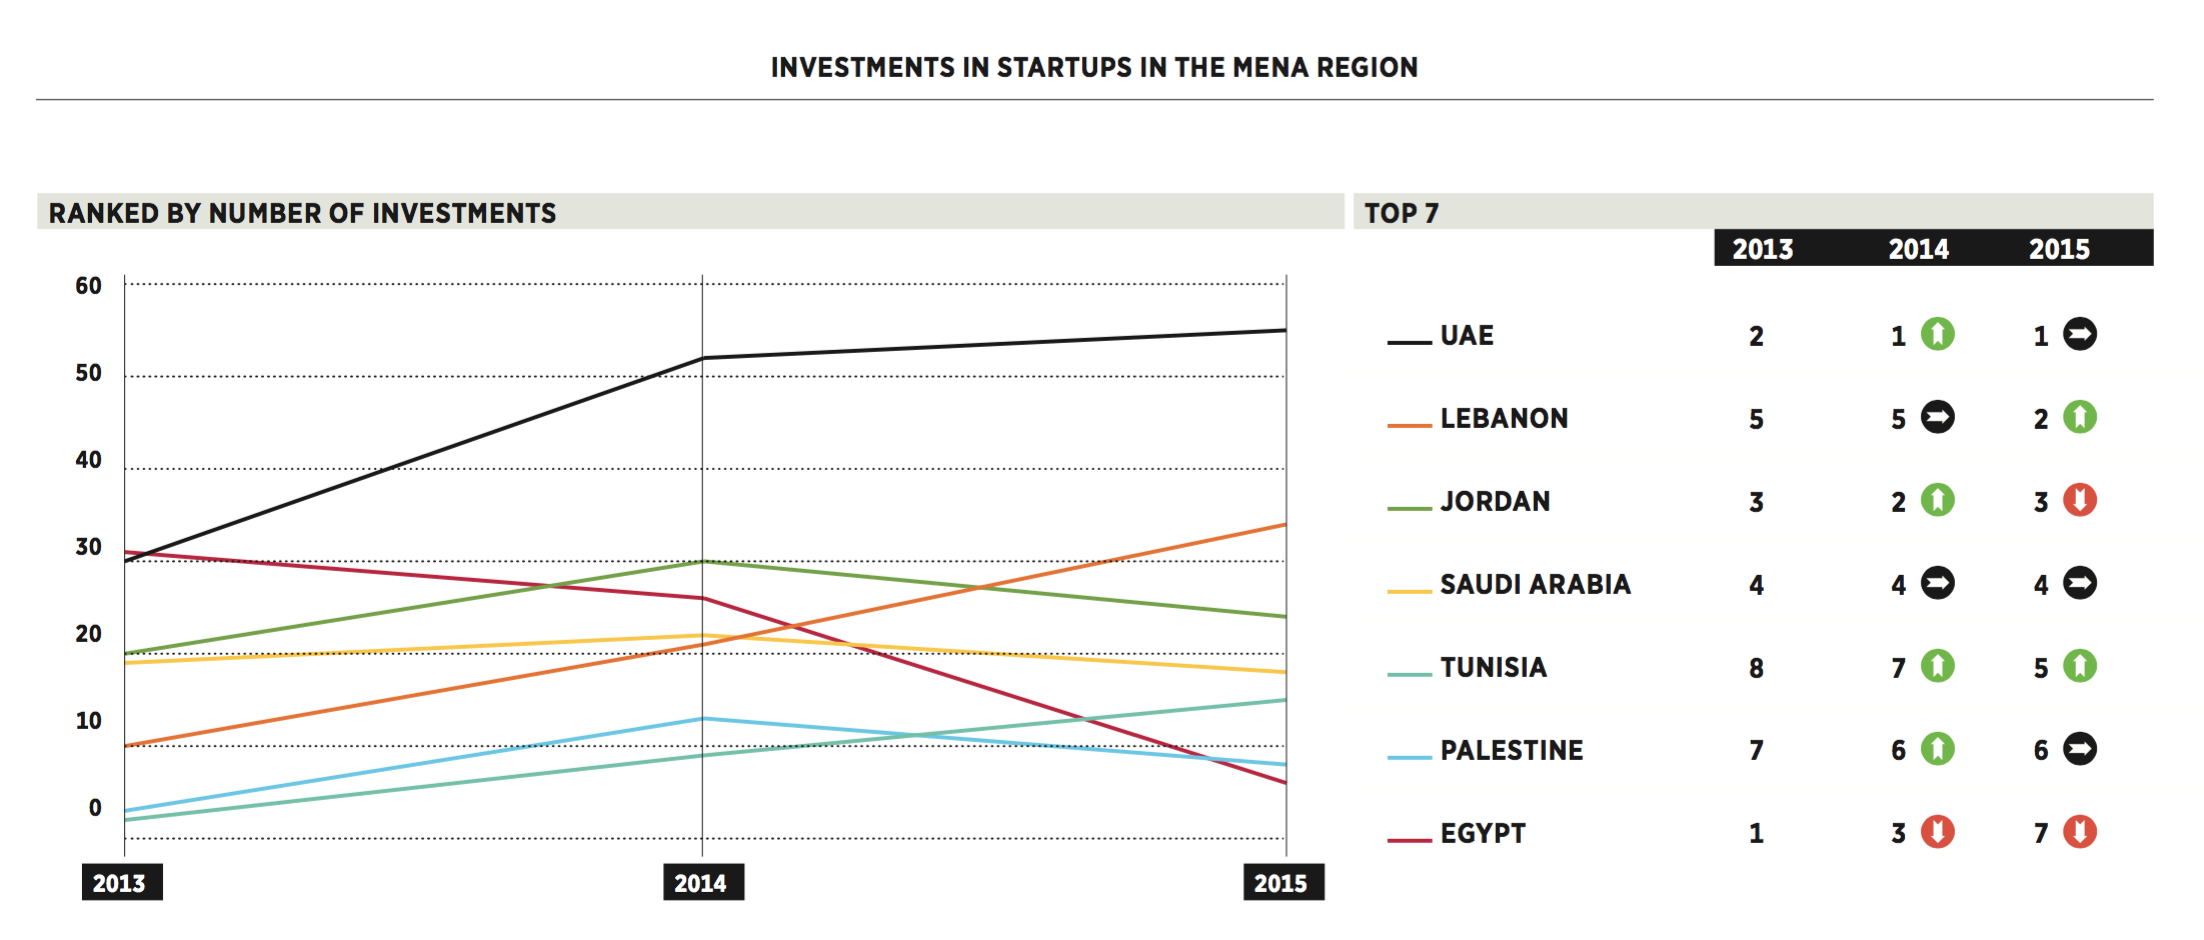 Investments in startups in the MENA region, ranked by number of investments.